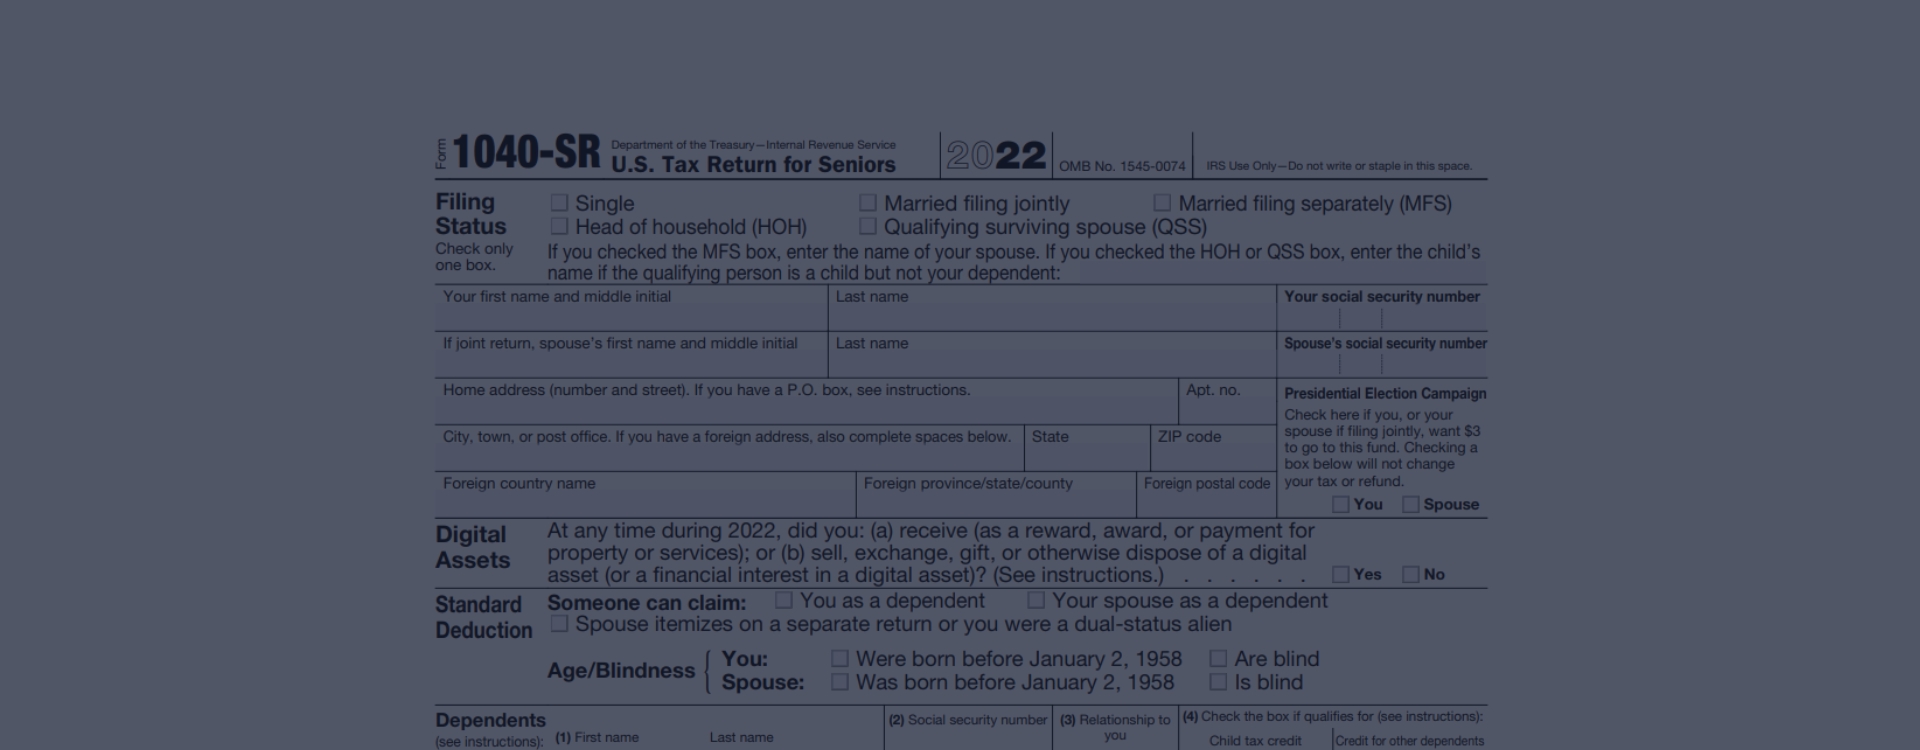 IRS Form 1040SR 📝 Printable 1040SR Form With Instructions Fillable